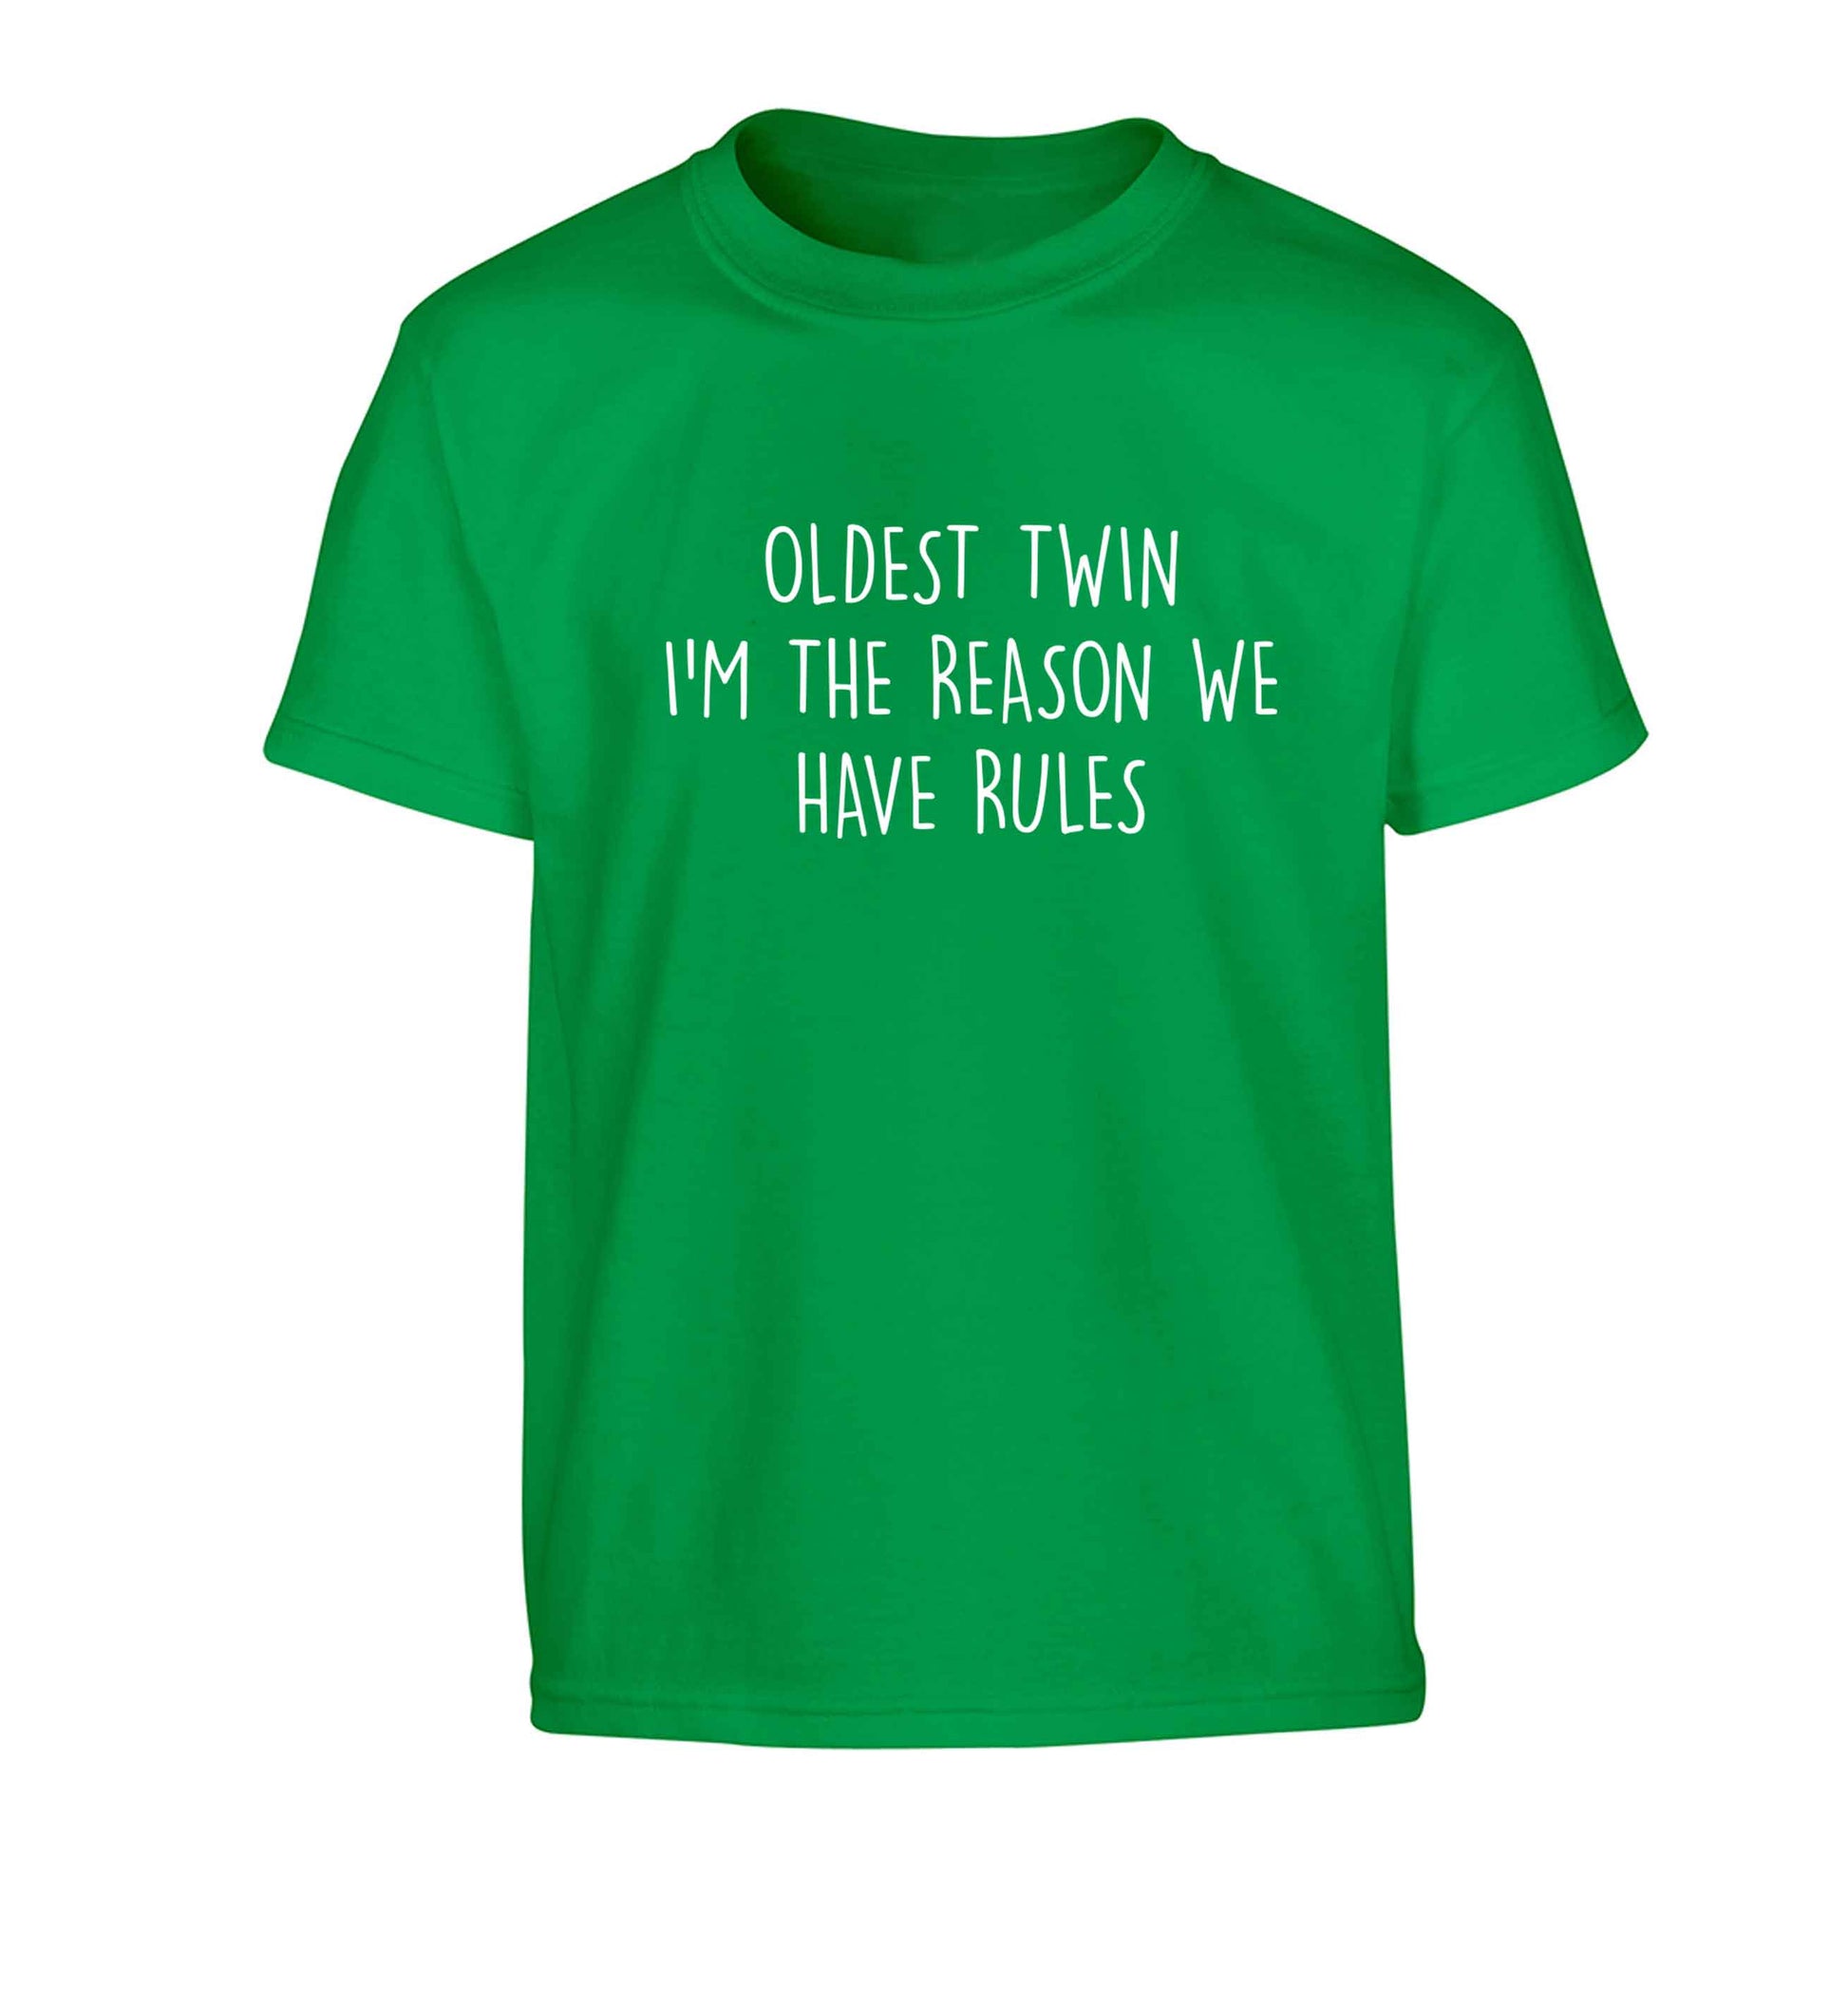 Oldest twin I'm the reason we have rules Children's green Tshirt 12-13 Years